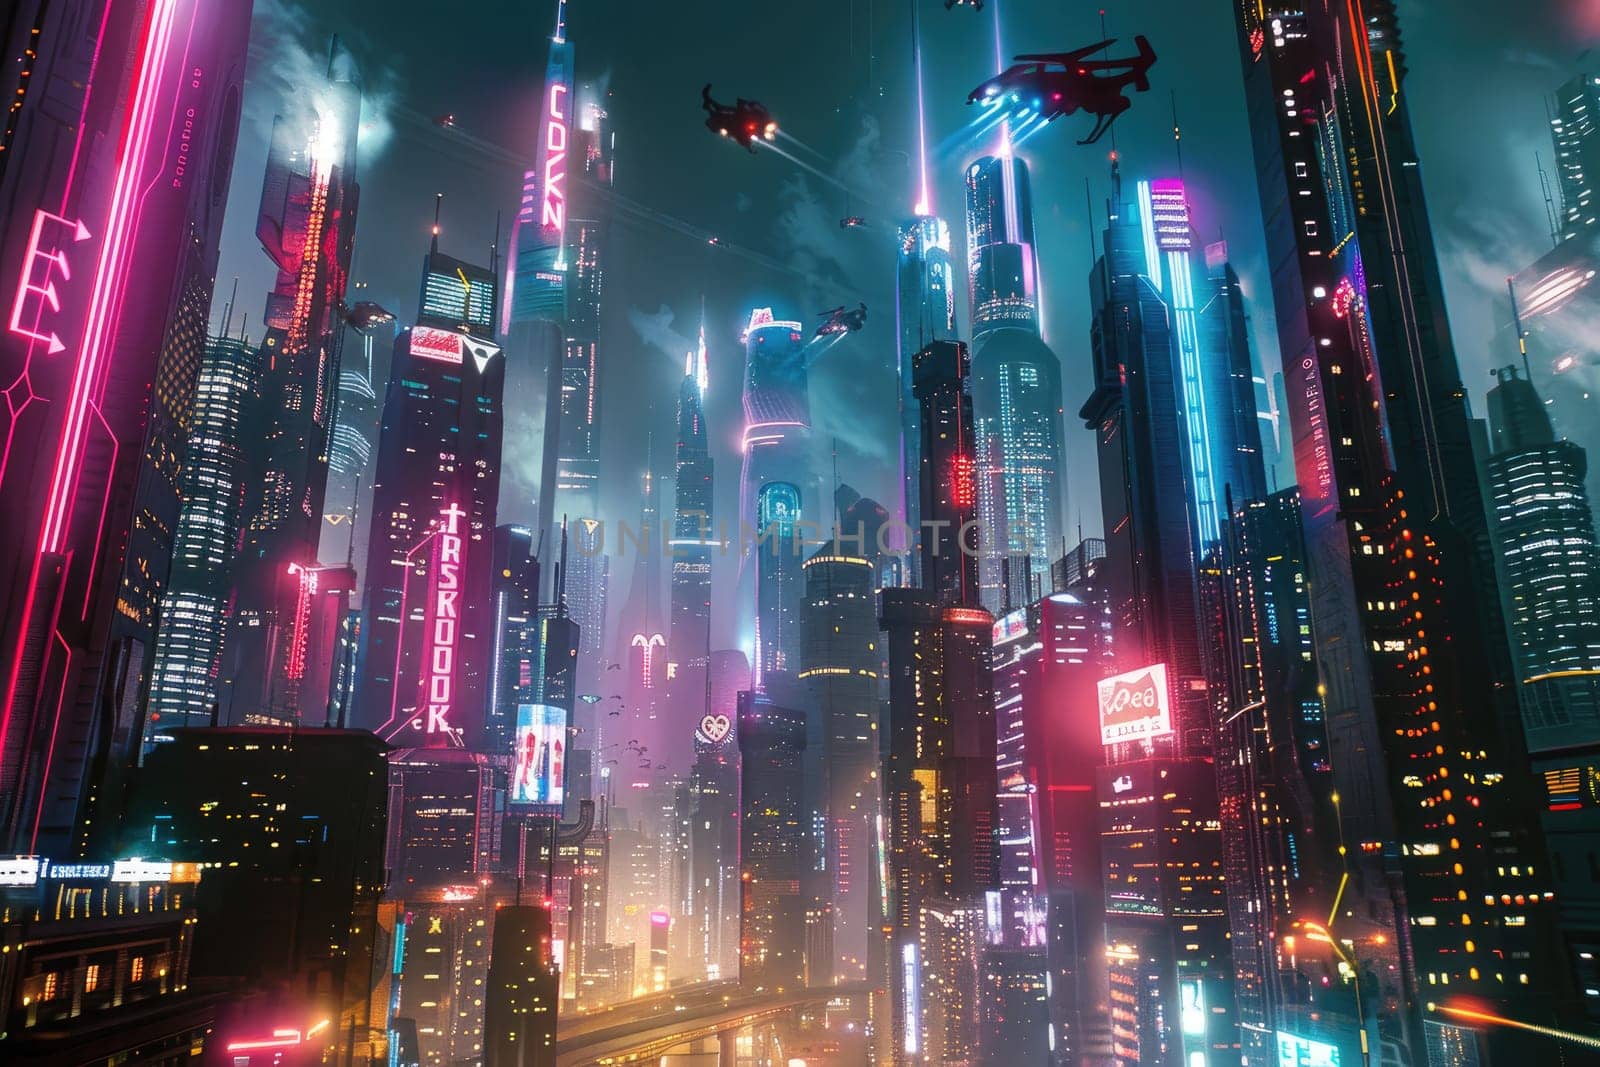 Futuristic cityscape rendered in 3D, with towering skyscraper illuminated by neon lights and flying